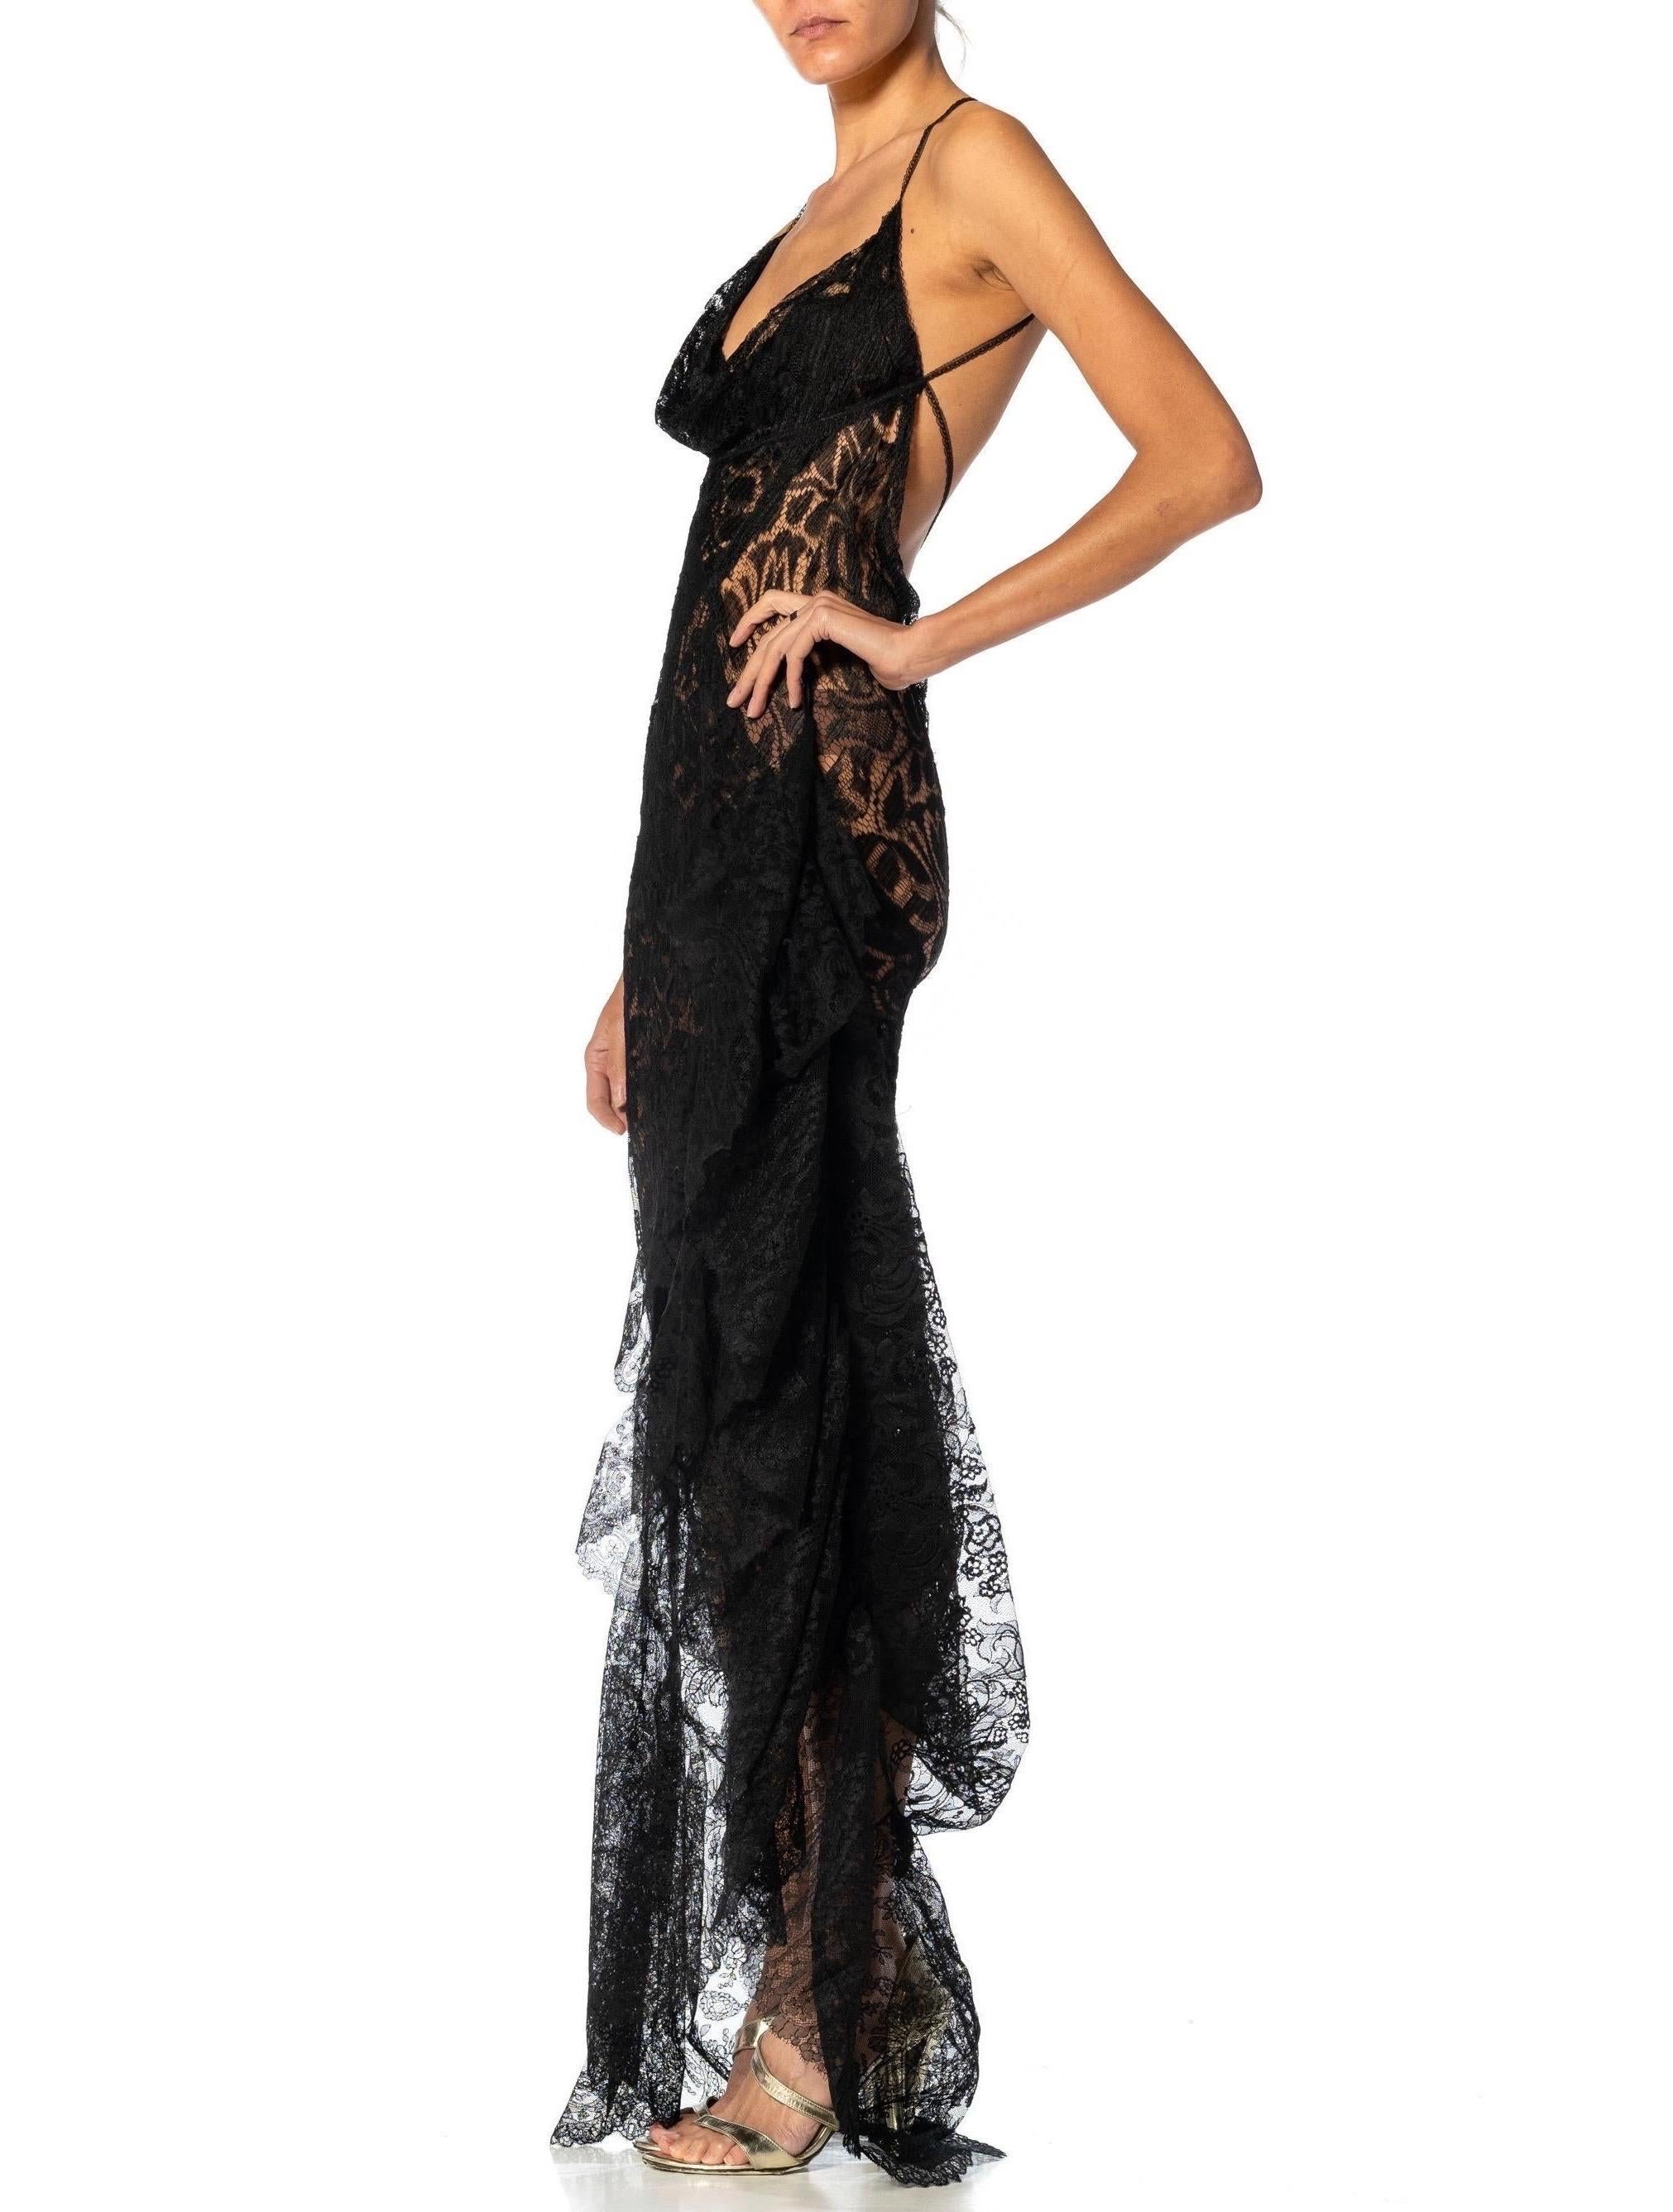 MORPHEW ATELIER Black Antique Rayon & Silk Chantilly Lace Backless Gown Trained For Sale 10